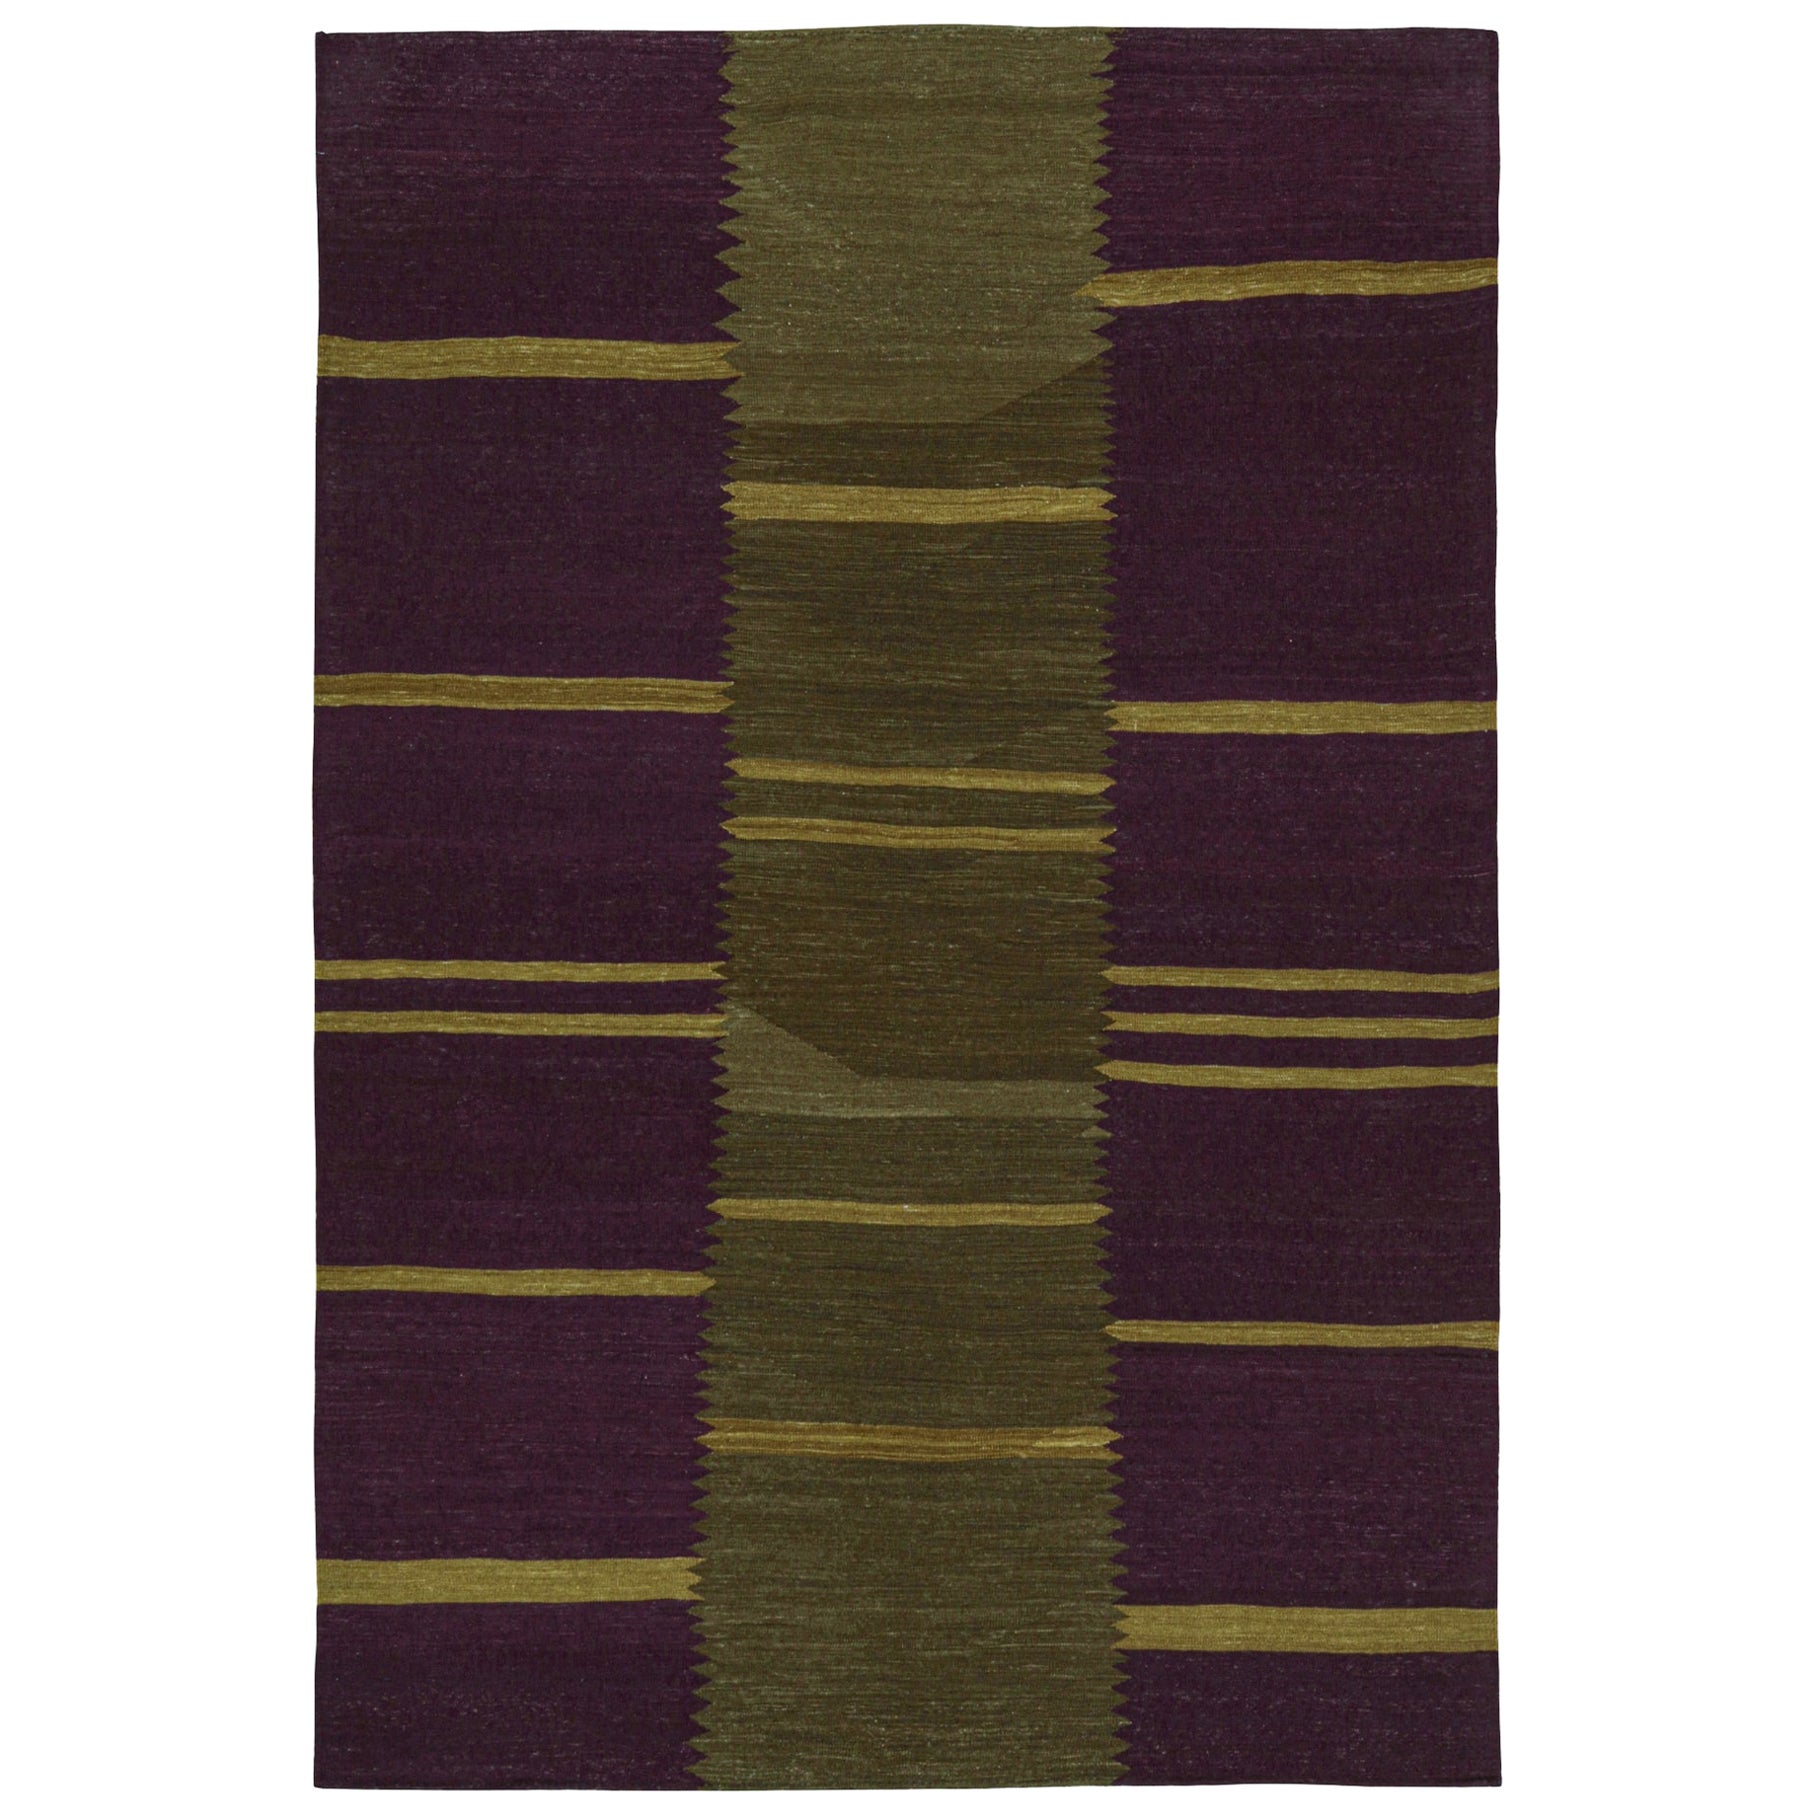 Rug & Kilim’s Contemporary Kilim in Aubergine and Chartreuse Green Stripes